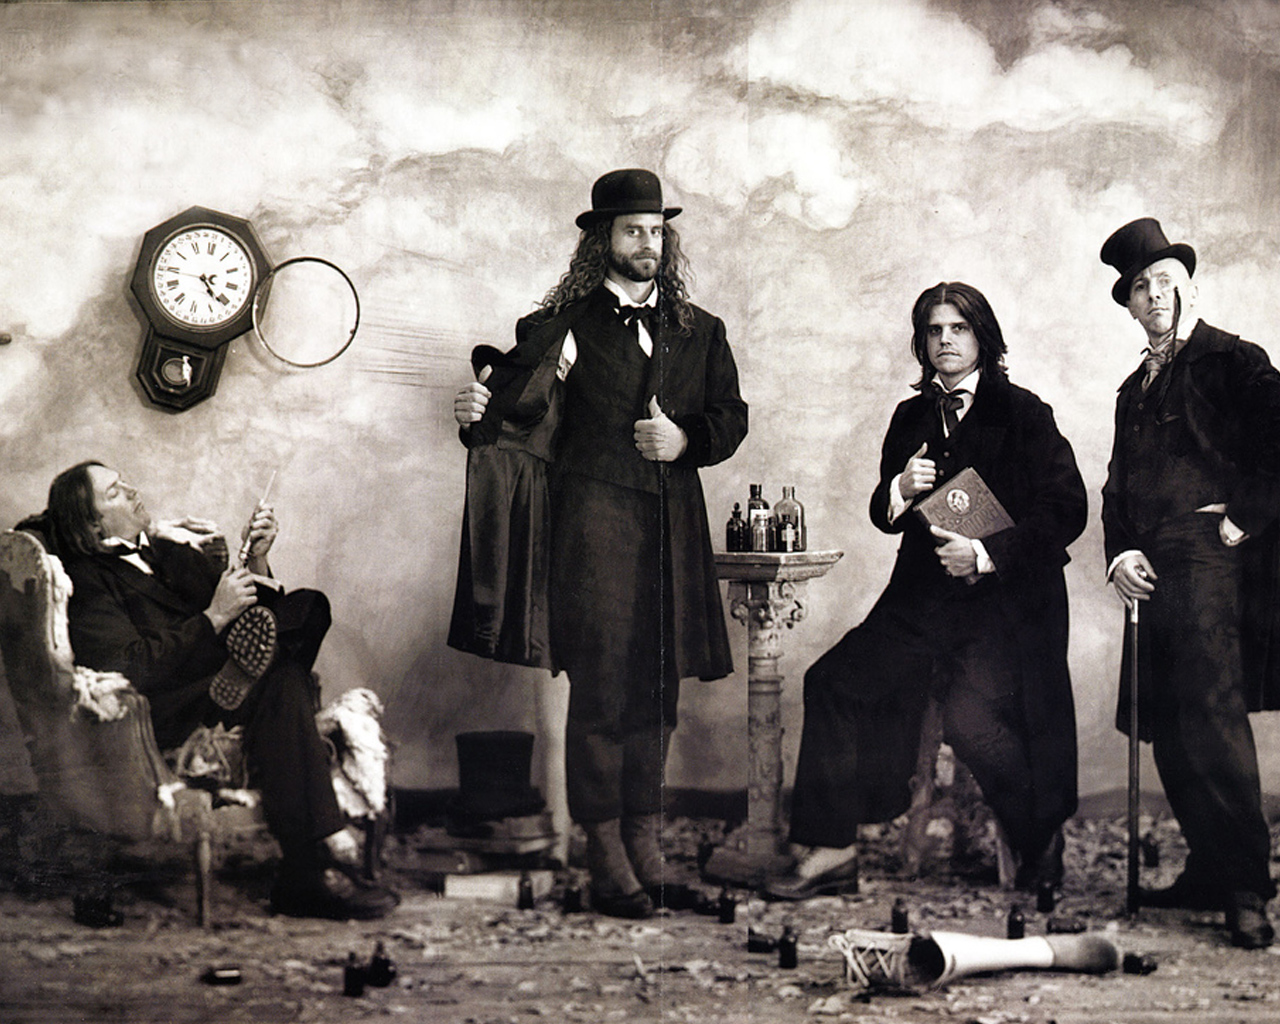 Tool Wallpapers and Extra Concert 2012 Online - Taringa!